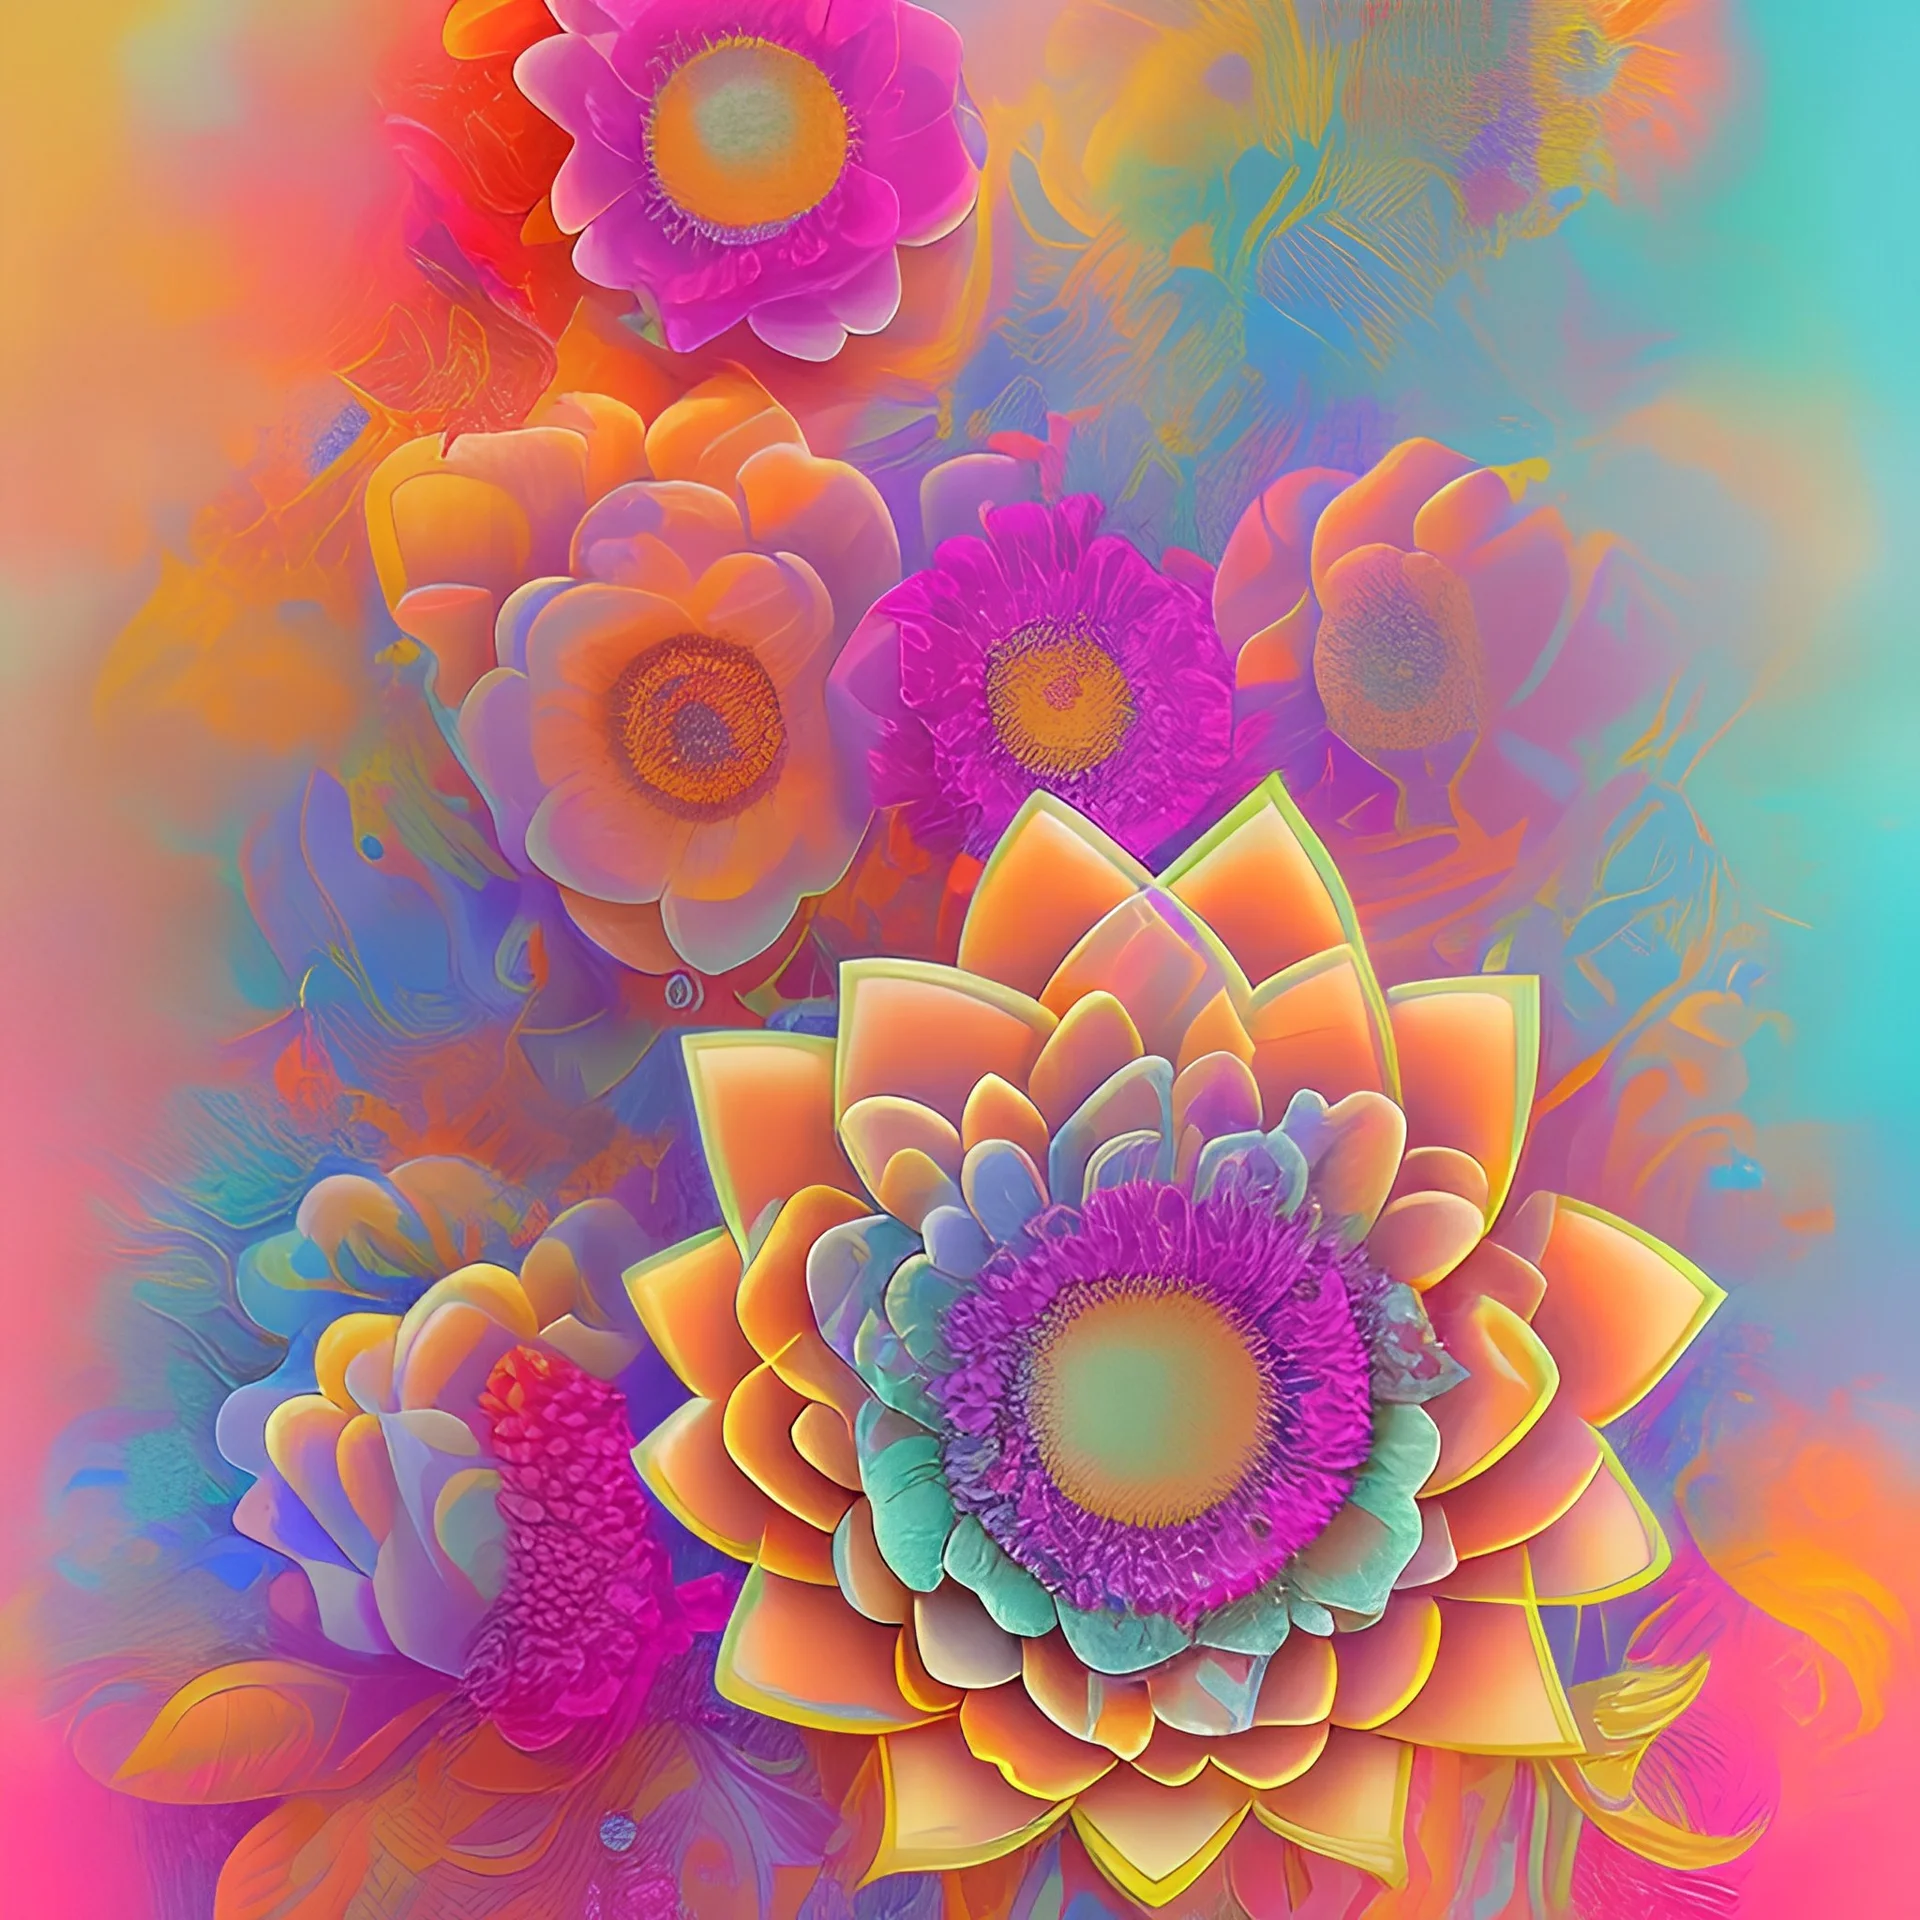  pastel colors, abstract art, flowers camp